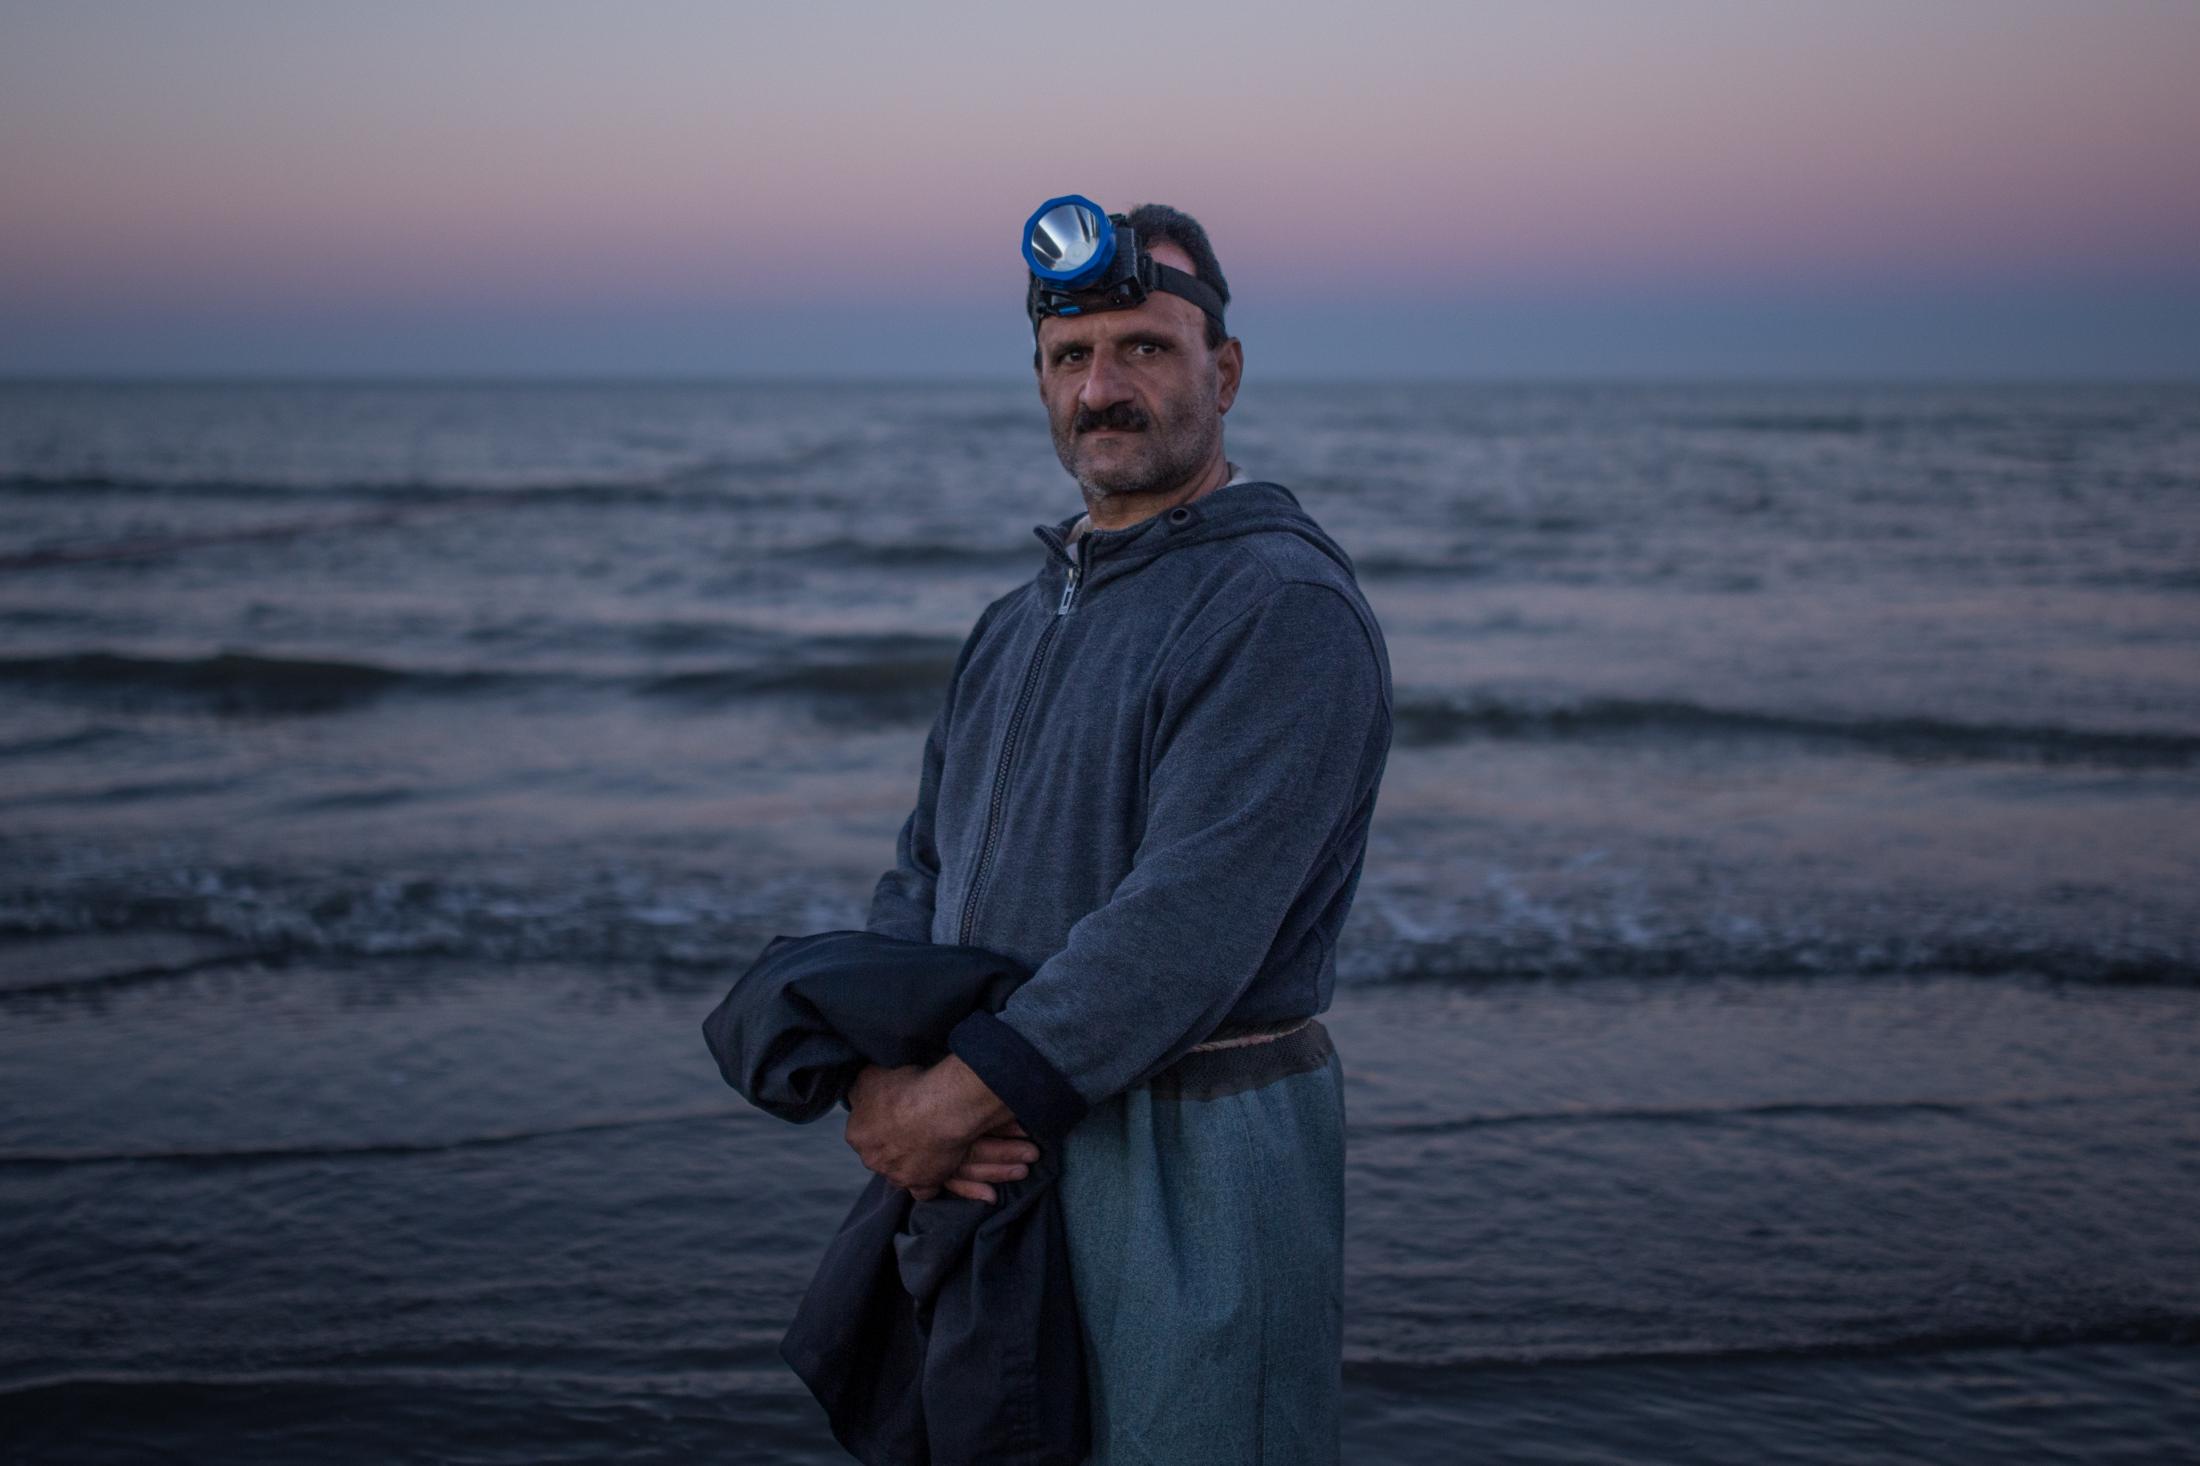  Reza has been fishing for 15 years. He complains about the shortage of fish for fishing and says in the past the situation was very different,...